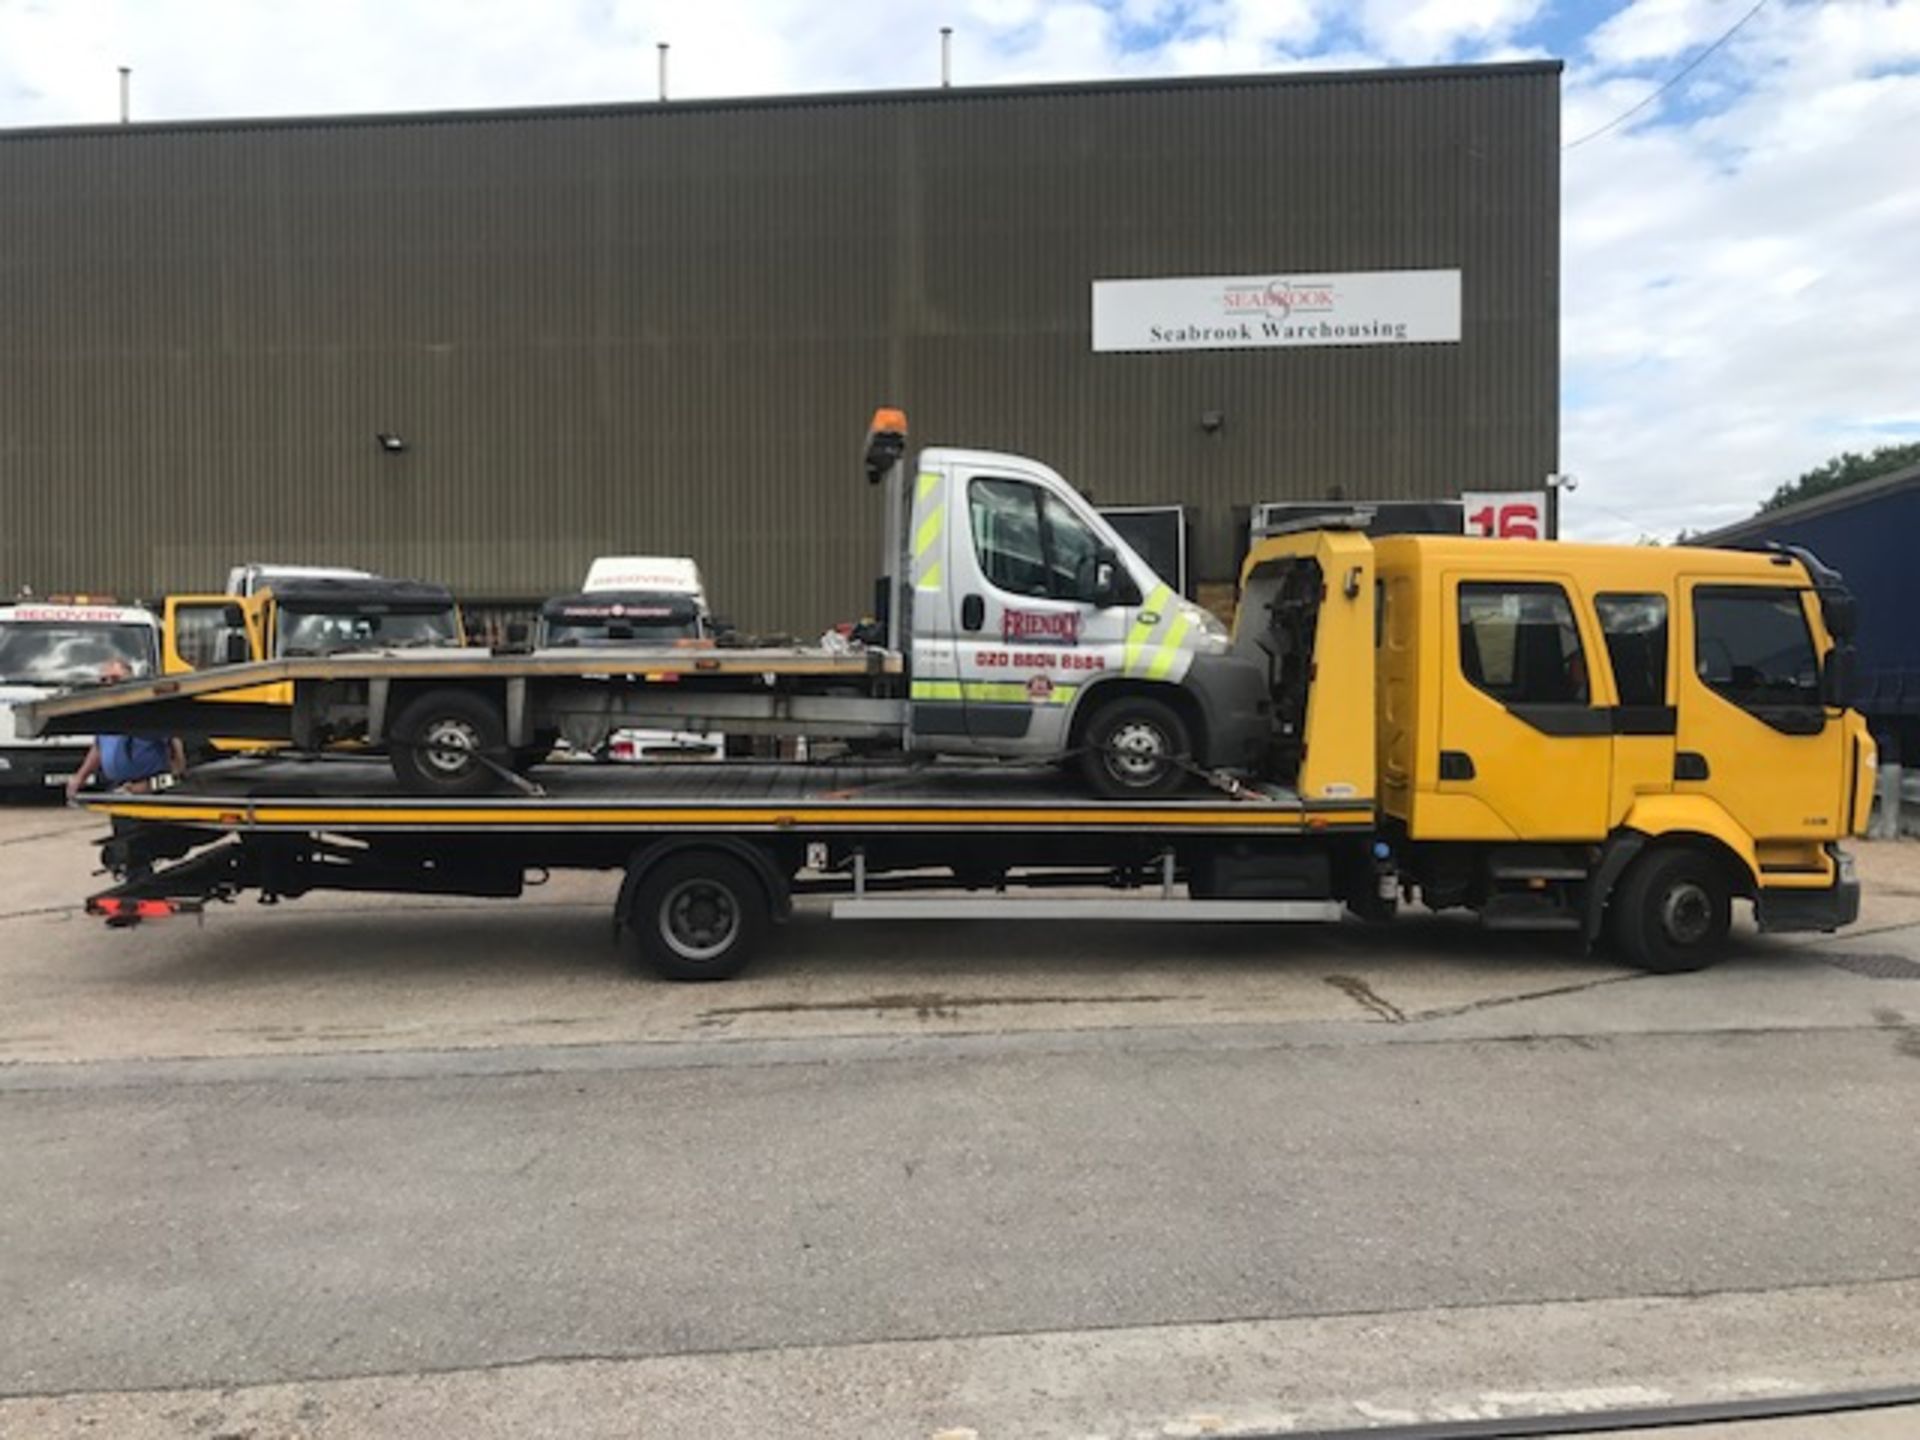 2010 Renault Midlum 220DXI 12t crew cab tilt and slide breakdown recovery vehicle with spec. lift, - Image 4 of 15